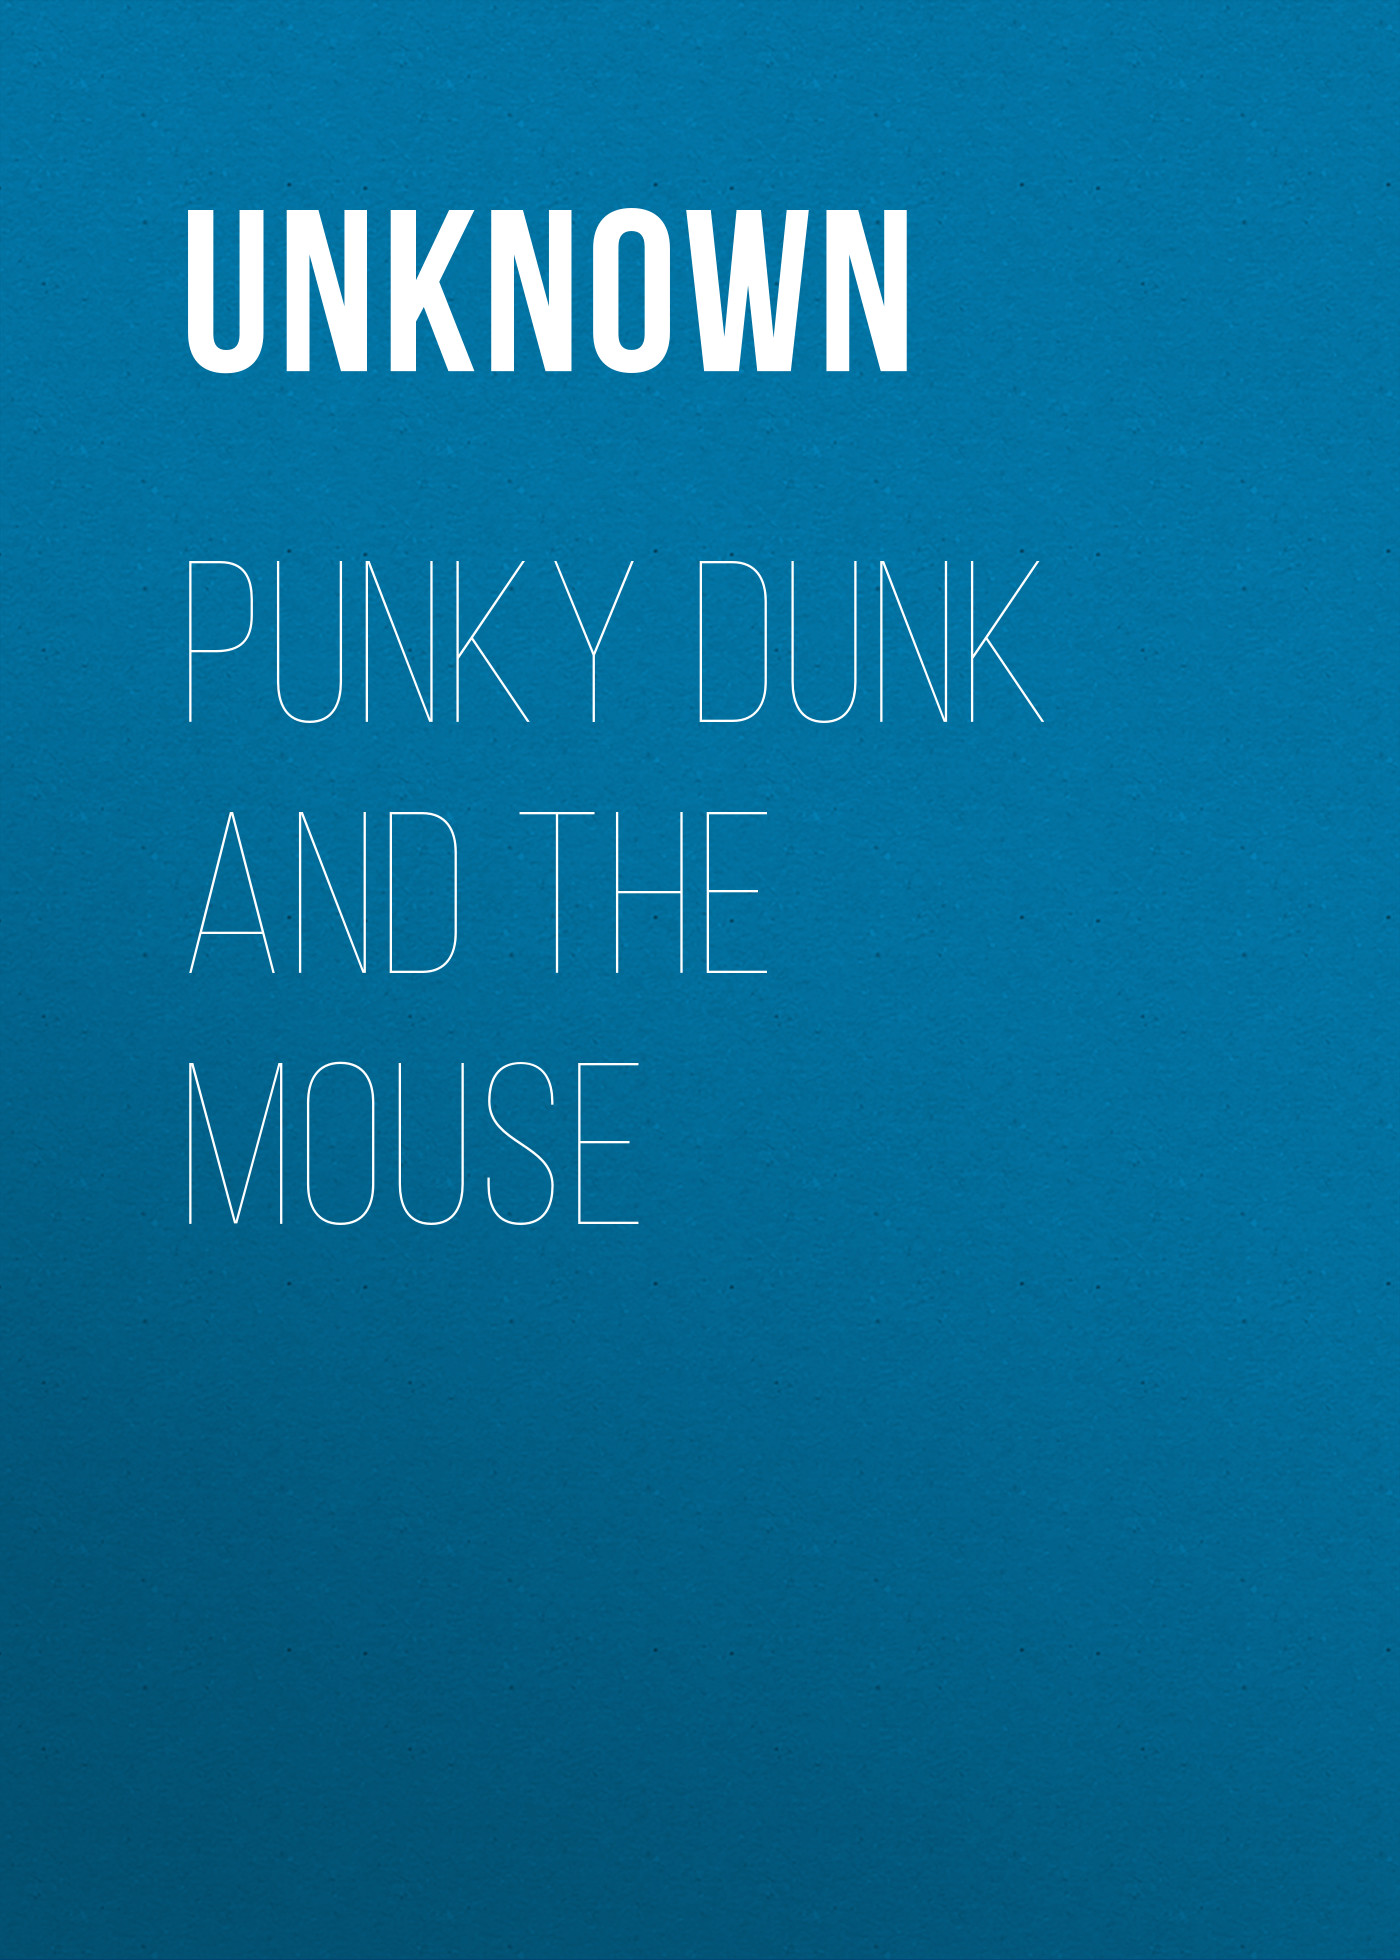 Unknown Punky Dunk and the Mouse